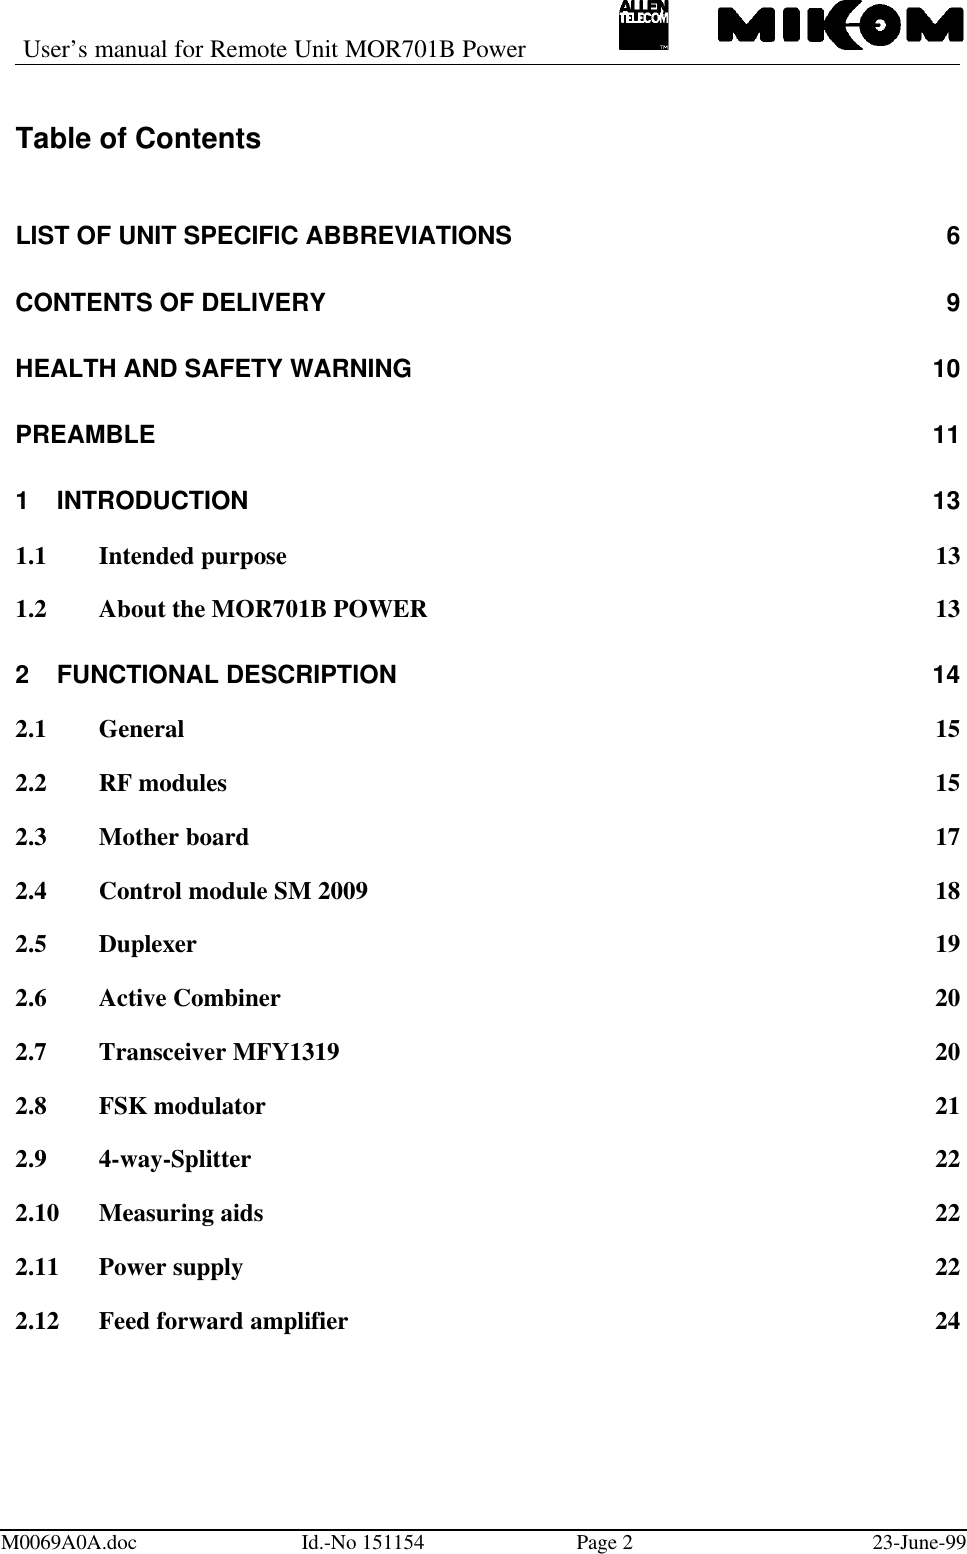 User’s manual for Remote Unit MOR701B PowerM0069A0A.doc Id.-No 151154 Page 223-June-99Table of ContentsLIST OF UNIT SPECIFIC ABBREVIATIONS 6CONTENTS OF DELIVERY 9HEALTH AND SAFETY WARNING  10PREAMBLE 111INTRODUCTION 131.1 Intended purpose 131.2 About the MOR701B POWER 132FUNCTIONAL DESCRIPTION 142.1 General 152.2 RF modules 152.3 Mother board 172.4 Control module SM 2009 182.5 Duplexer 192.6 Active Combiner 202.7 Transceiver MFY1319 202.8 FSK modulator 212.9 4-way-Splitter 222.10 Measuring aids 222.11 Power supply 222.12 Feed forward amplifier 24